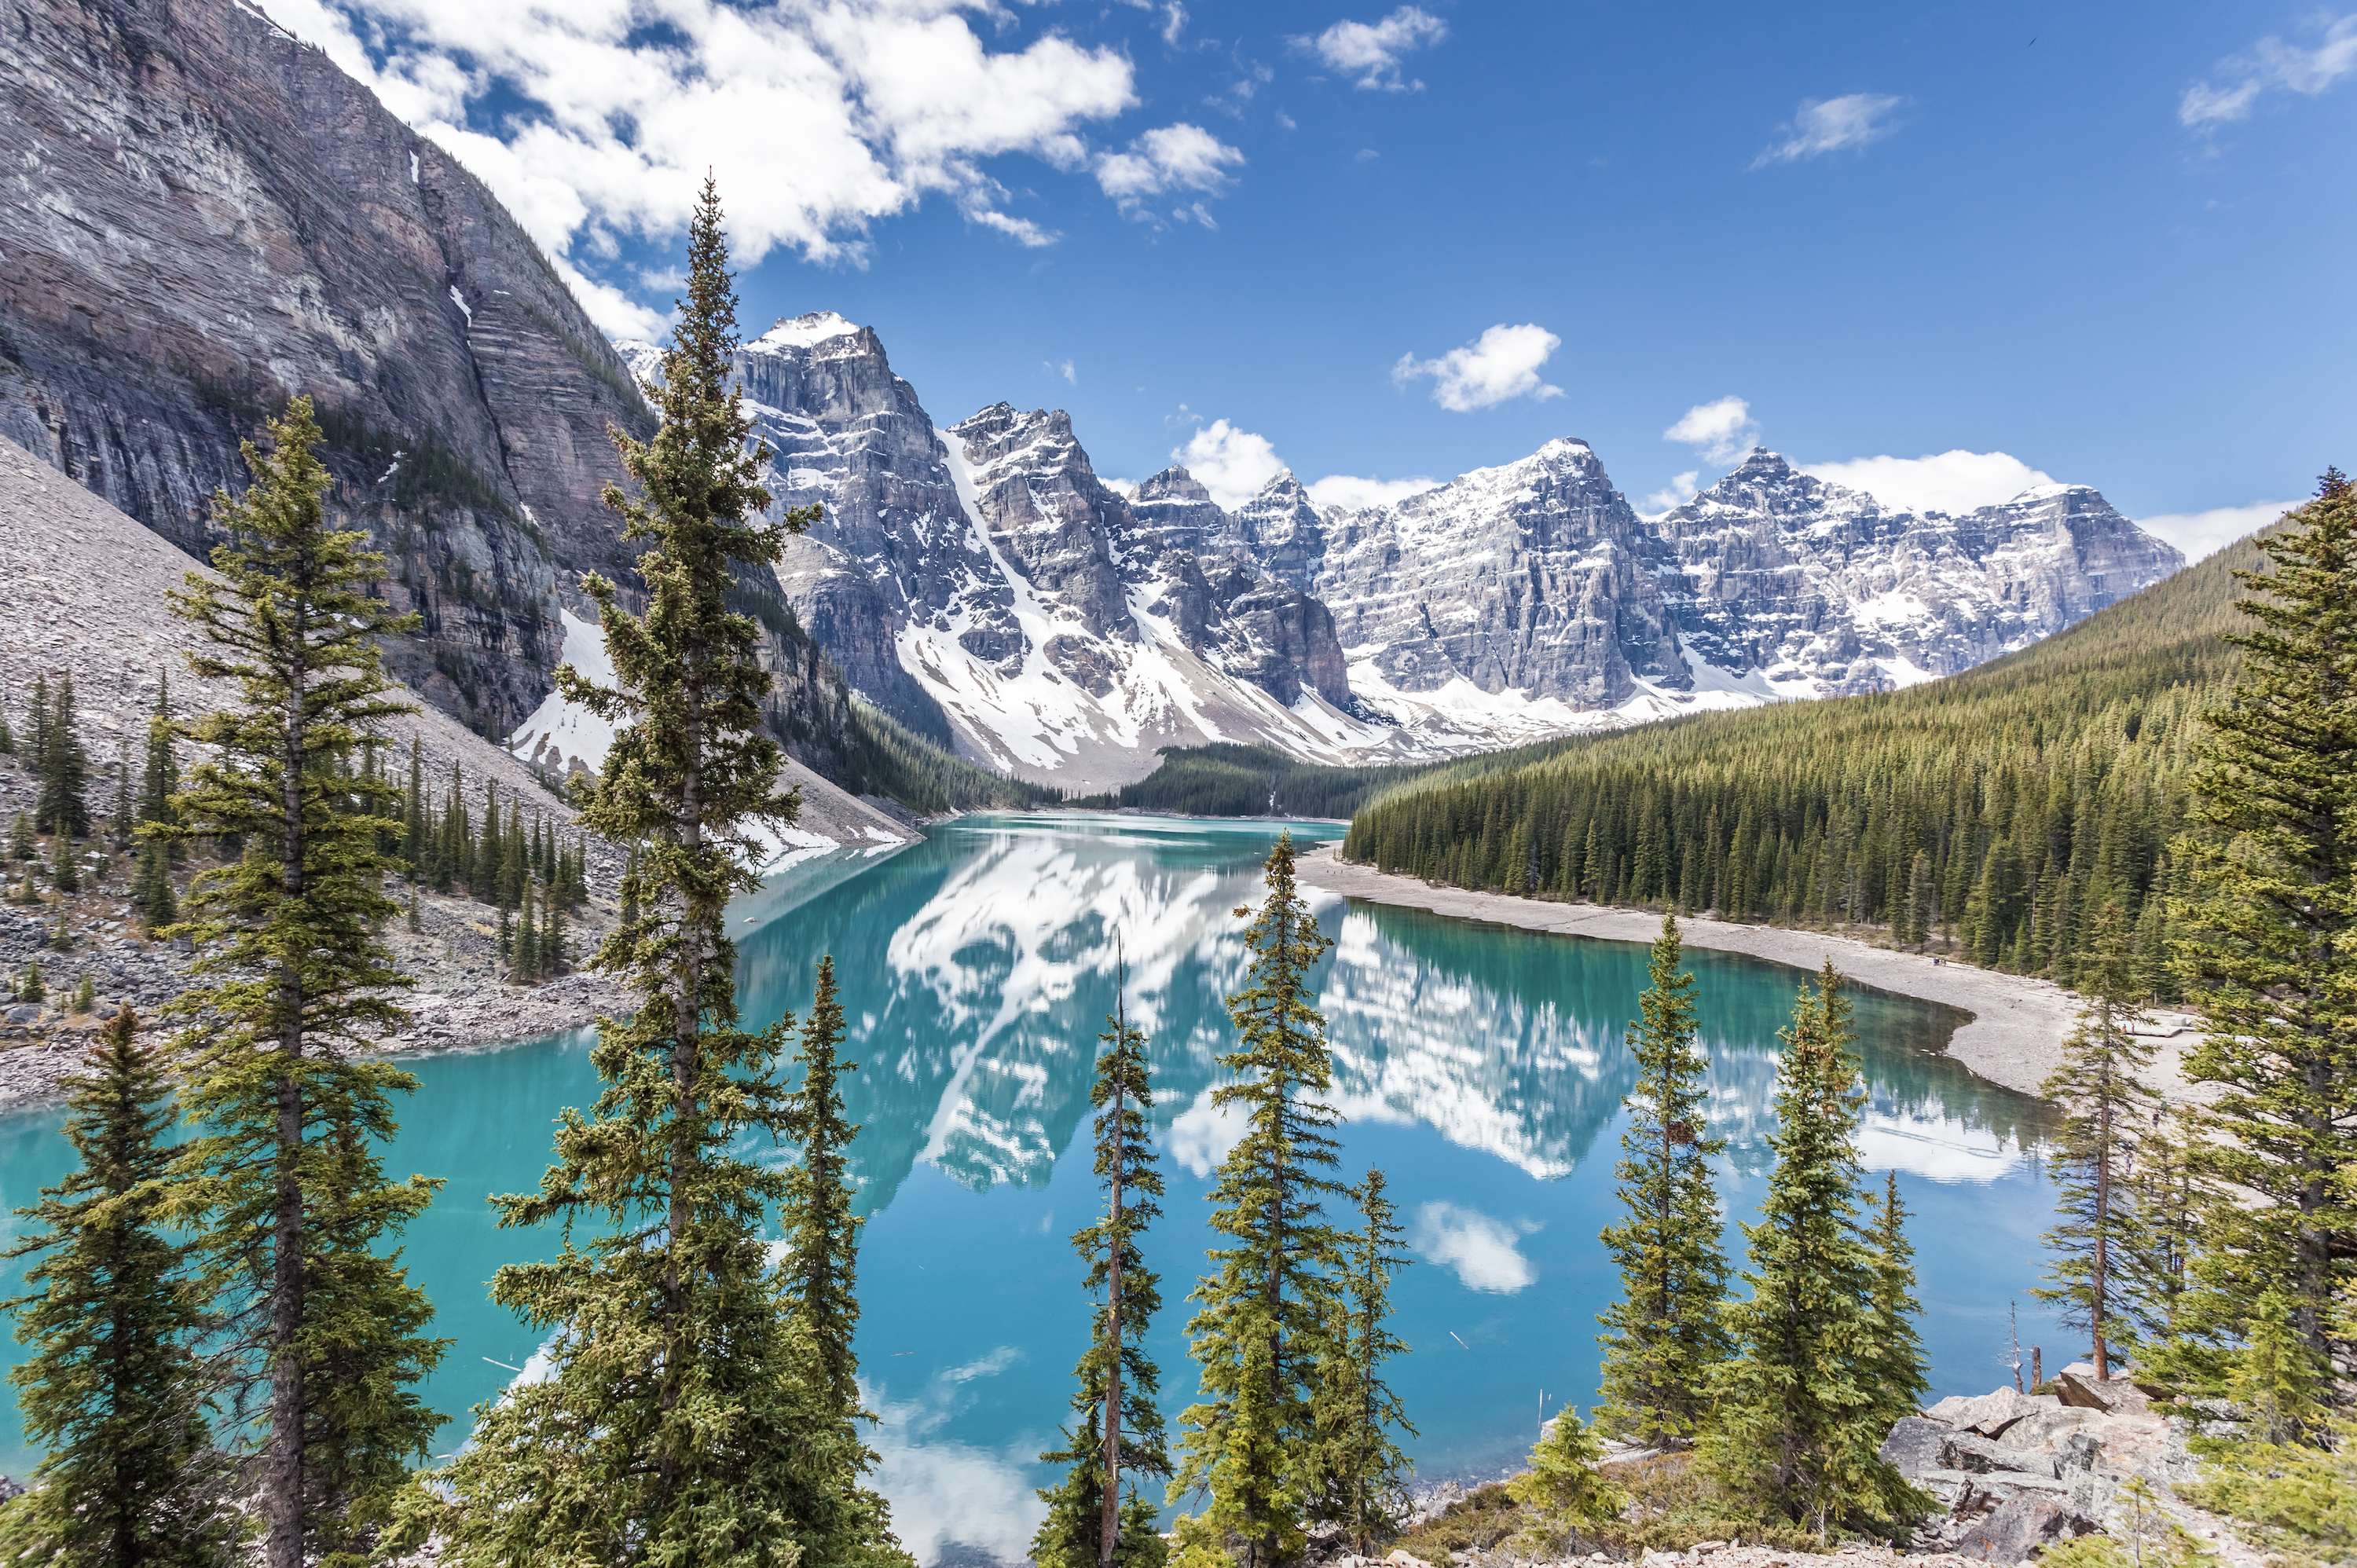 4. Inside Banff National Park - Best for Nature Lovers - Moraine lake in Banff National Park, Canadian Rockies, Canada.